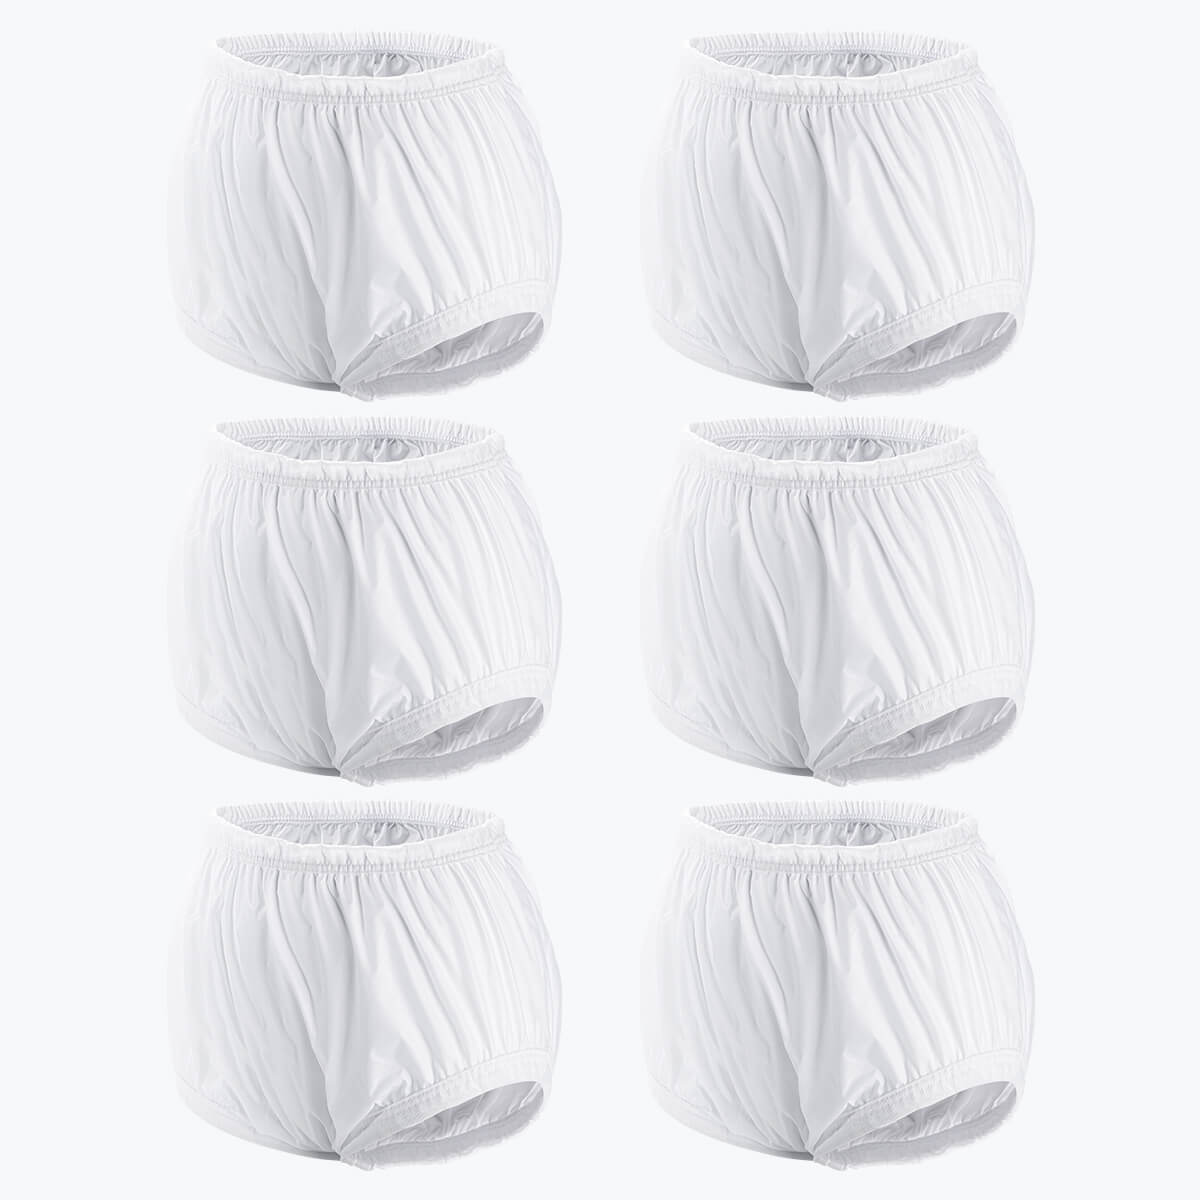 Adult Incontinence Underwear Women Waterproof Underwear for Men Leak Proof  Underwear Rubber Pants for Adults Incontinence Washable Plastic Pants for